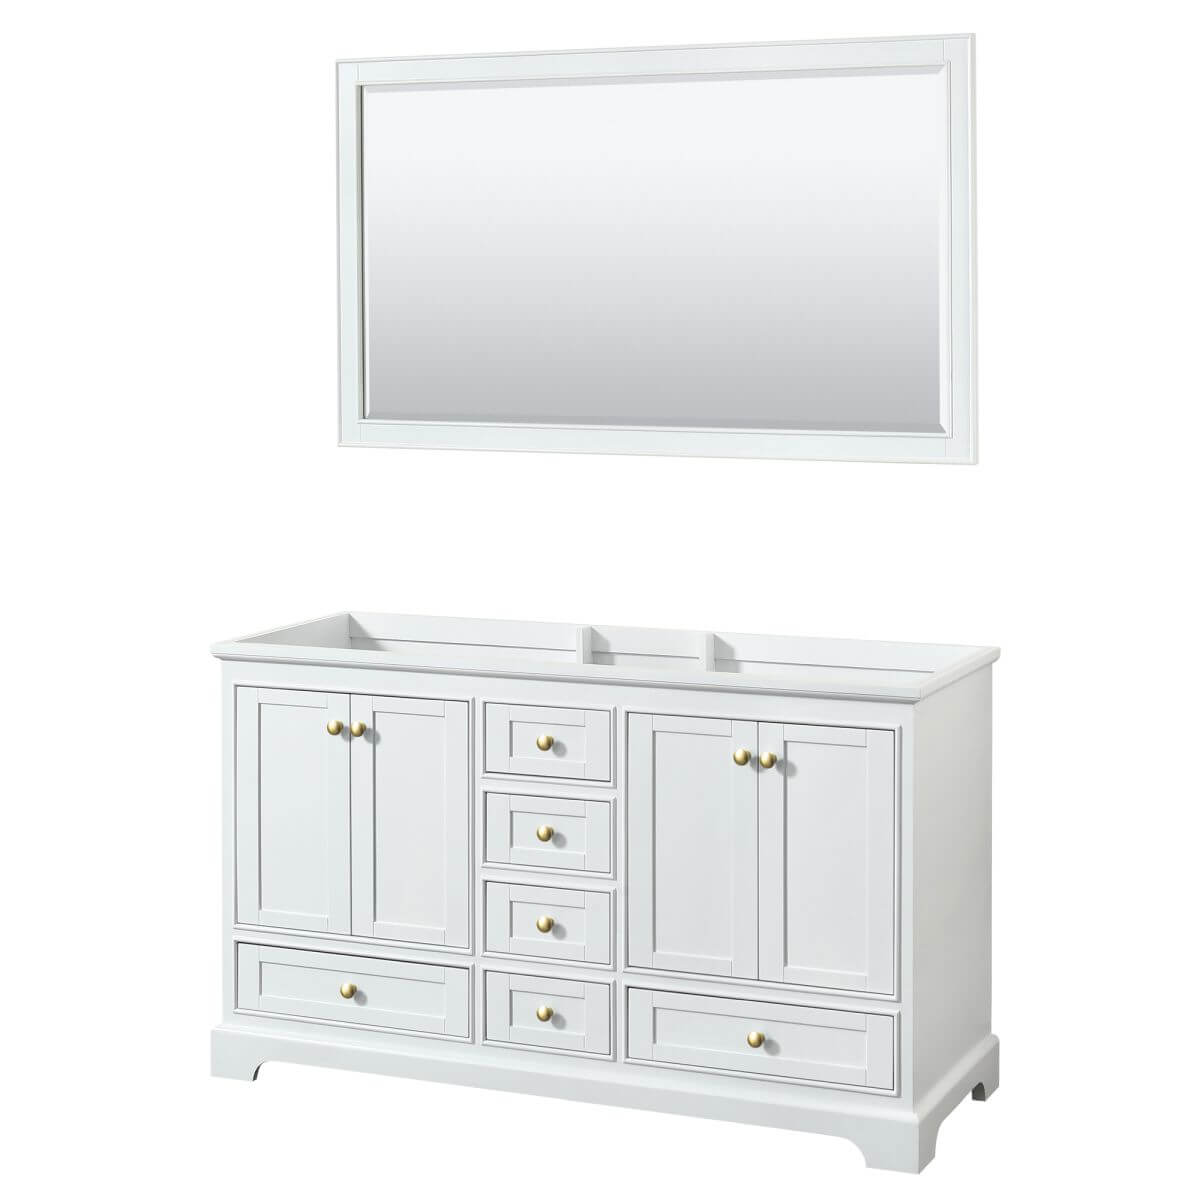 Wyndham Collection Deborah 60 inch Double Bathroom Vanity in White with 58 inch Mirror, Brushed Gold Trim, No Countertop and No Sinks - WCS202060DWGCXSXXM58